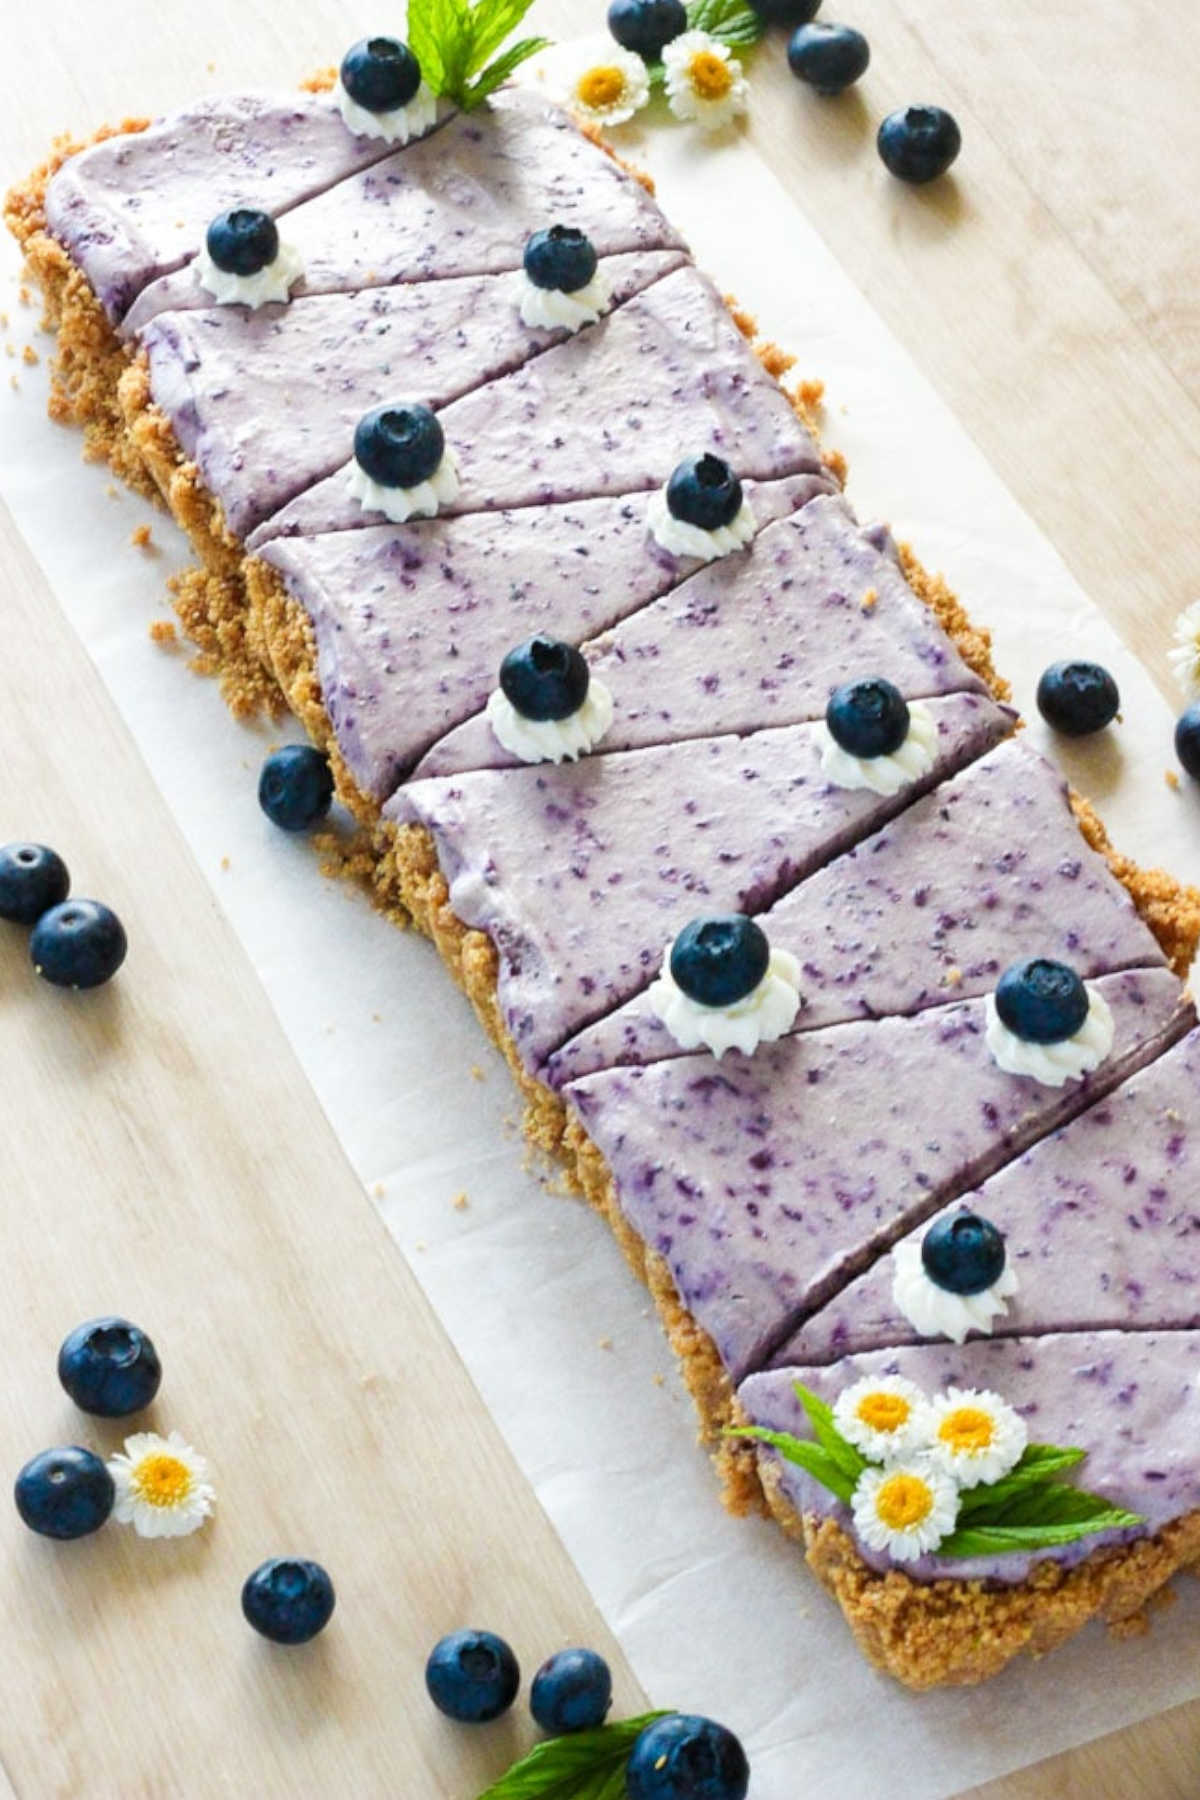 No bake blueberry cheesecake with blueberry icing on top and fresh blueberries.